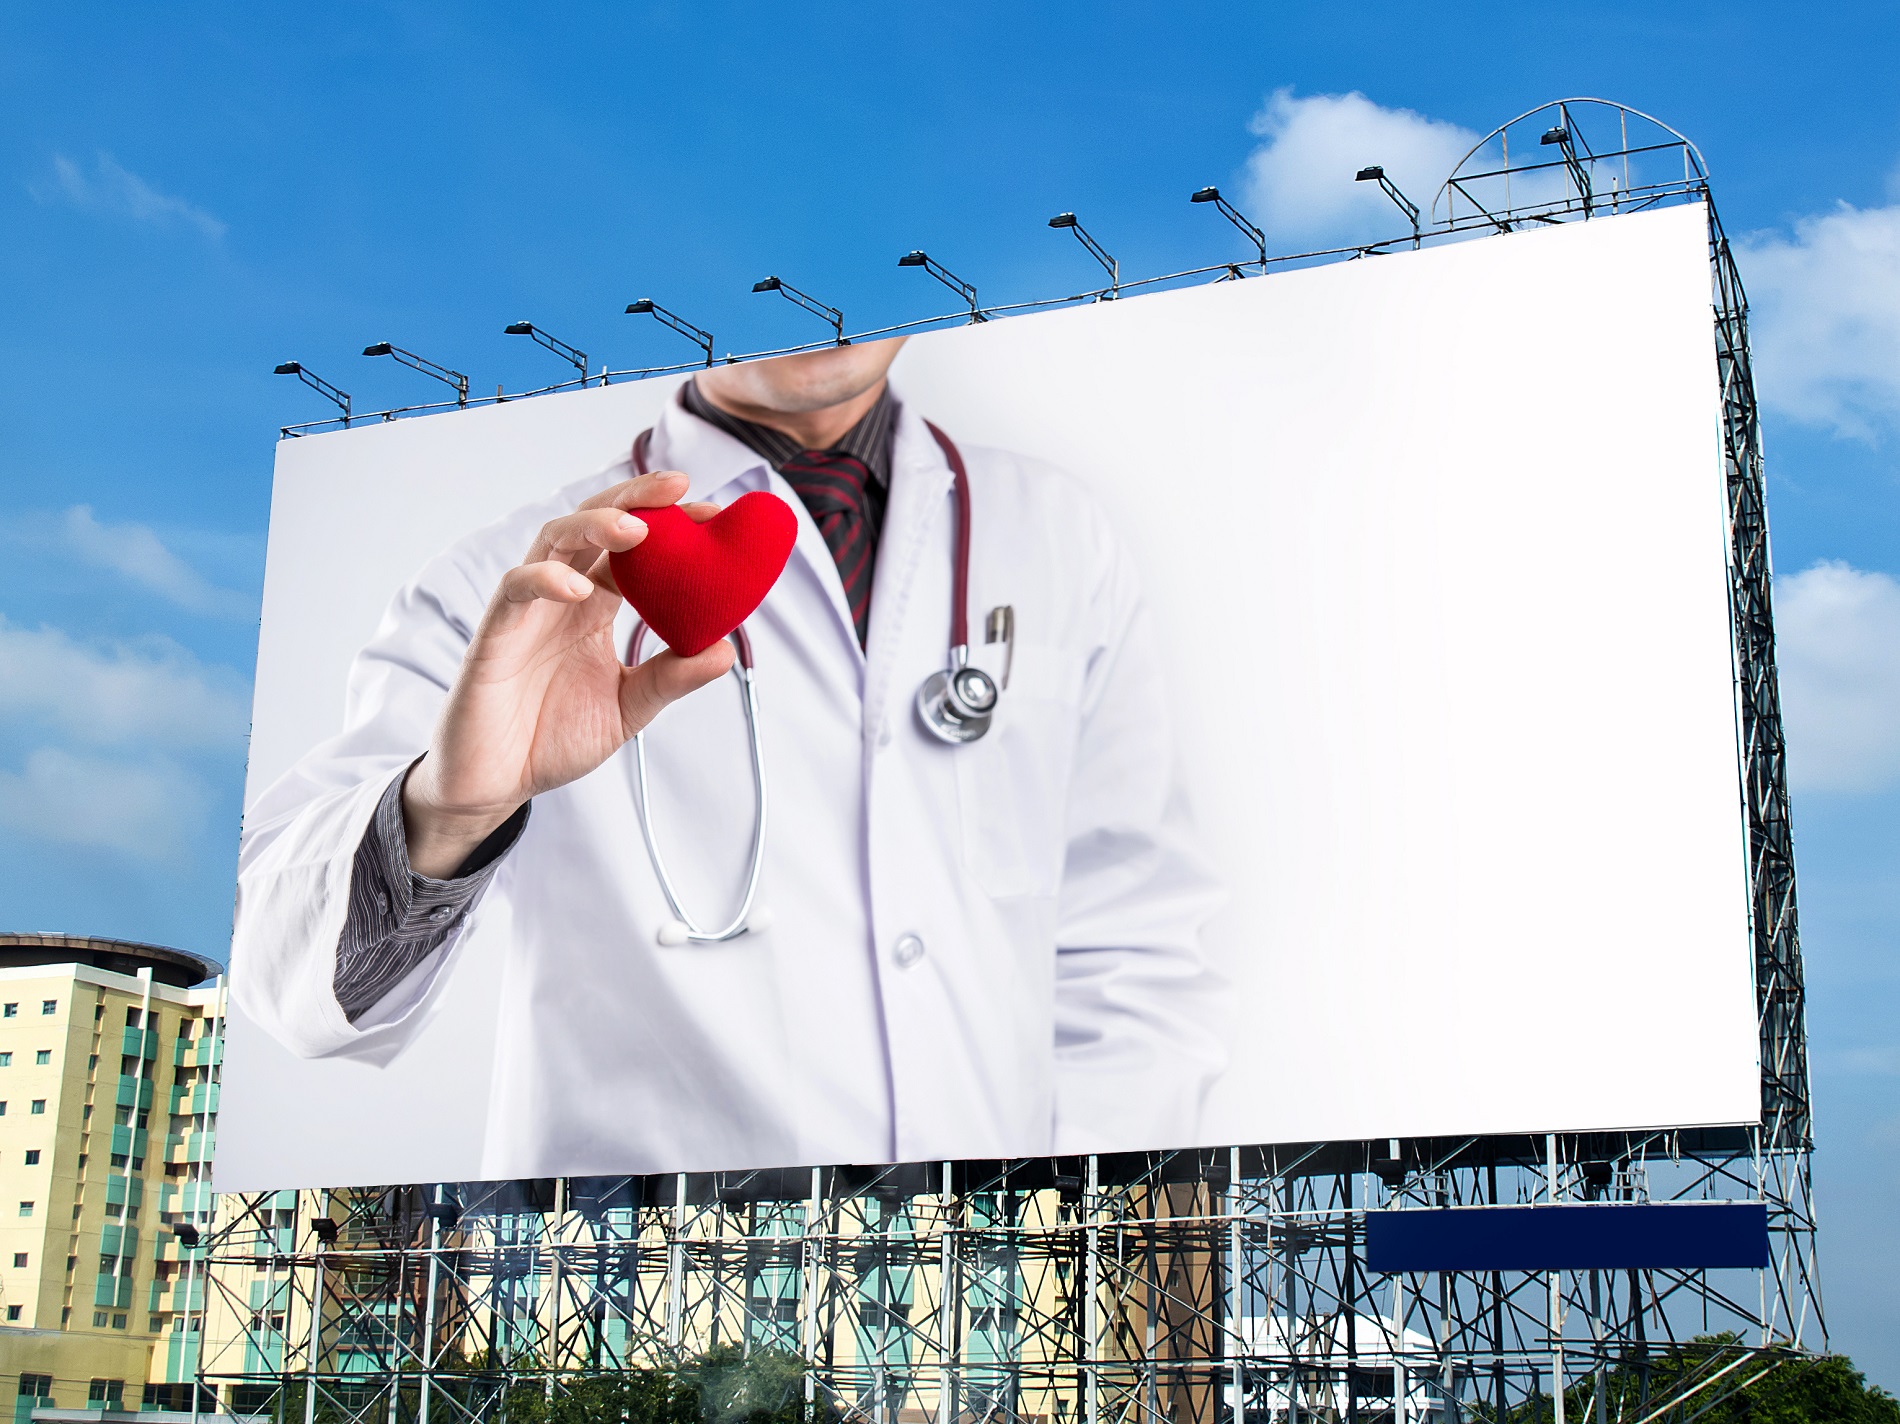 An image of a medical billboard displaying powerful messages for health awareness